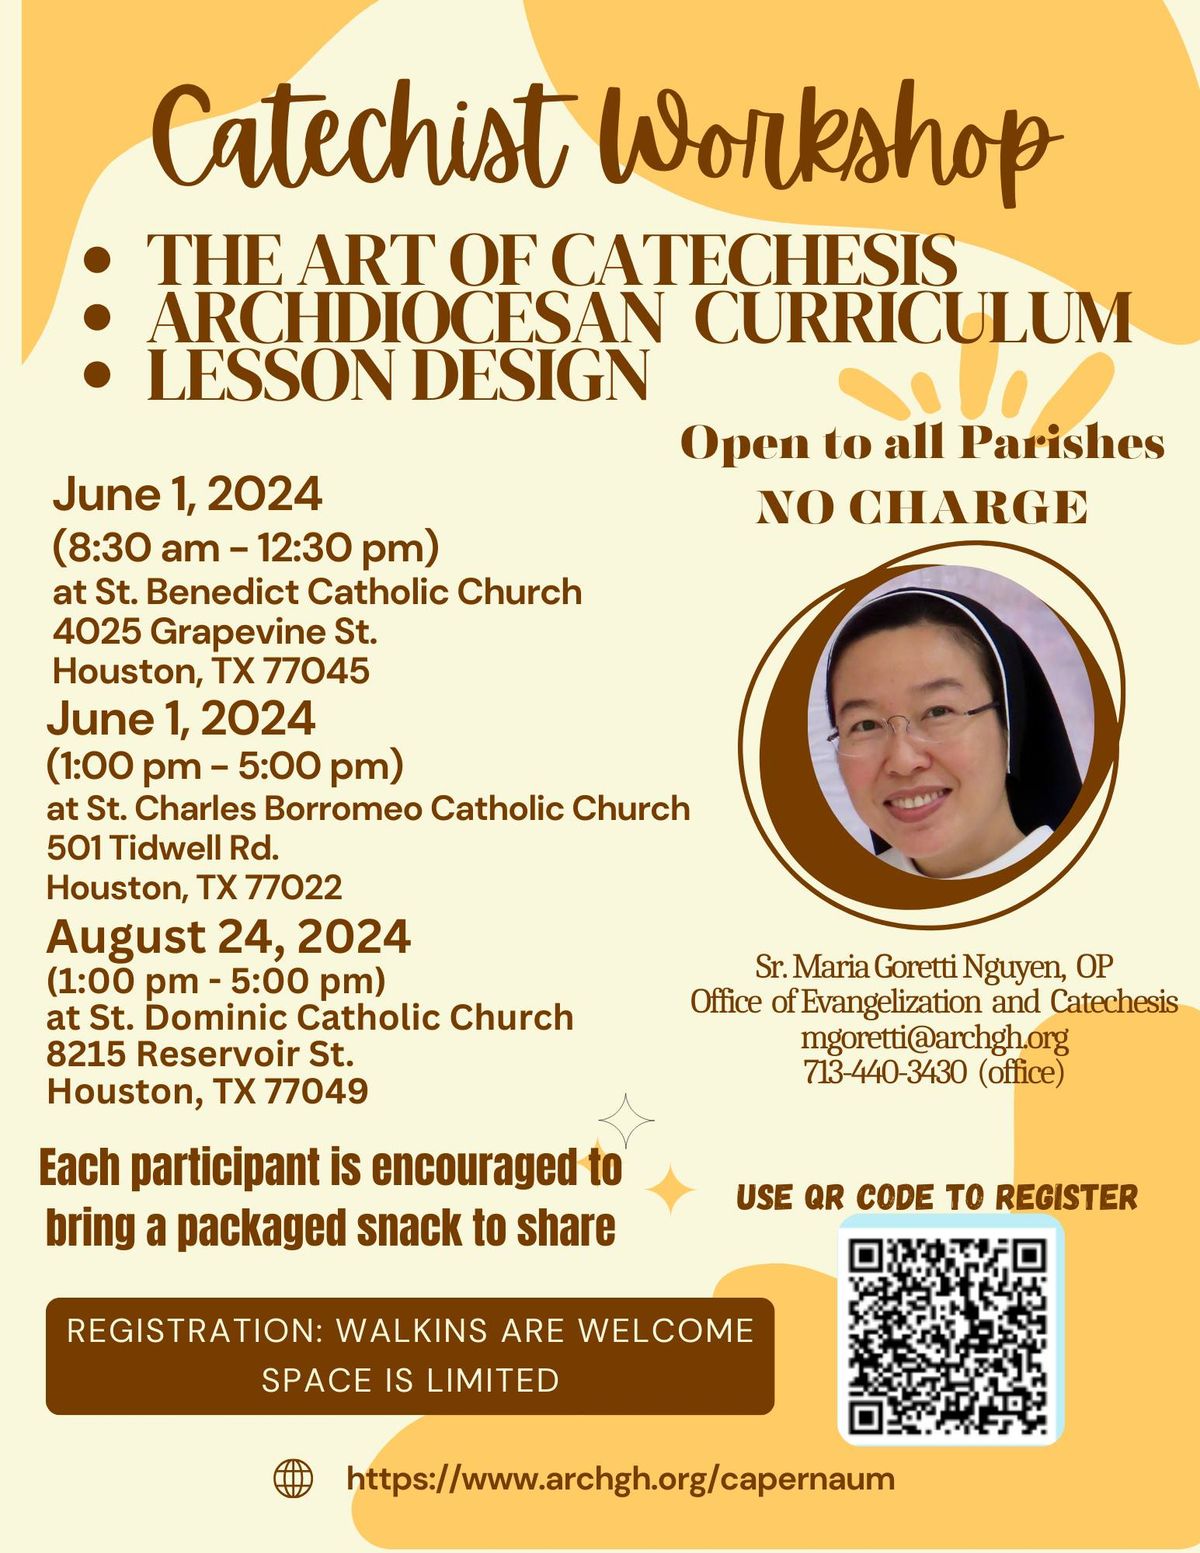 CATECHIST WORKSHOP - a fresh start for the New Catechetical Year!